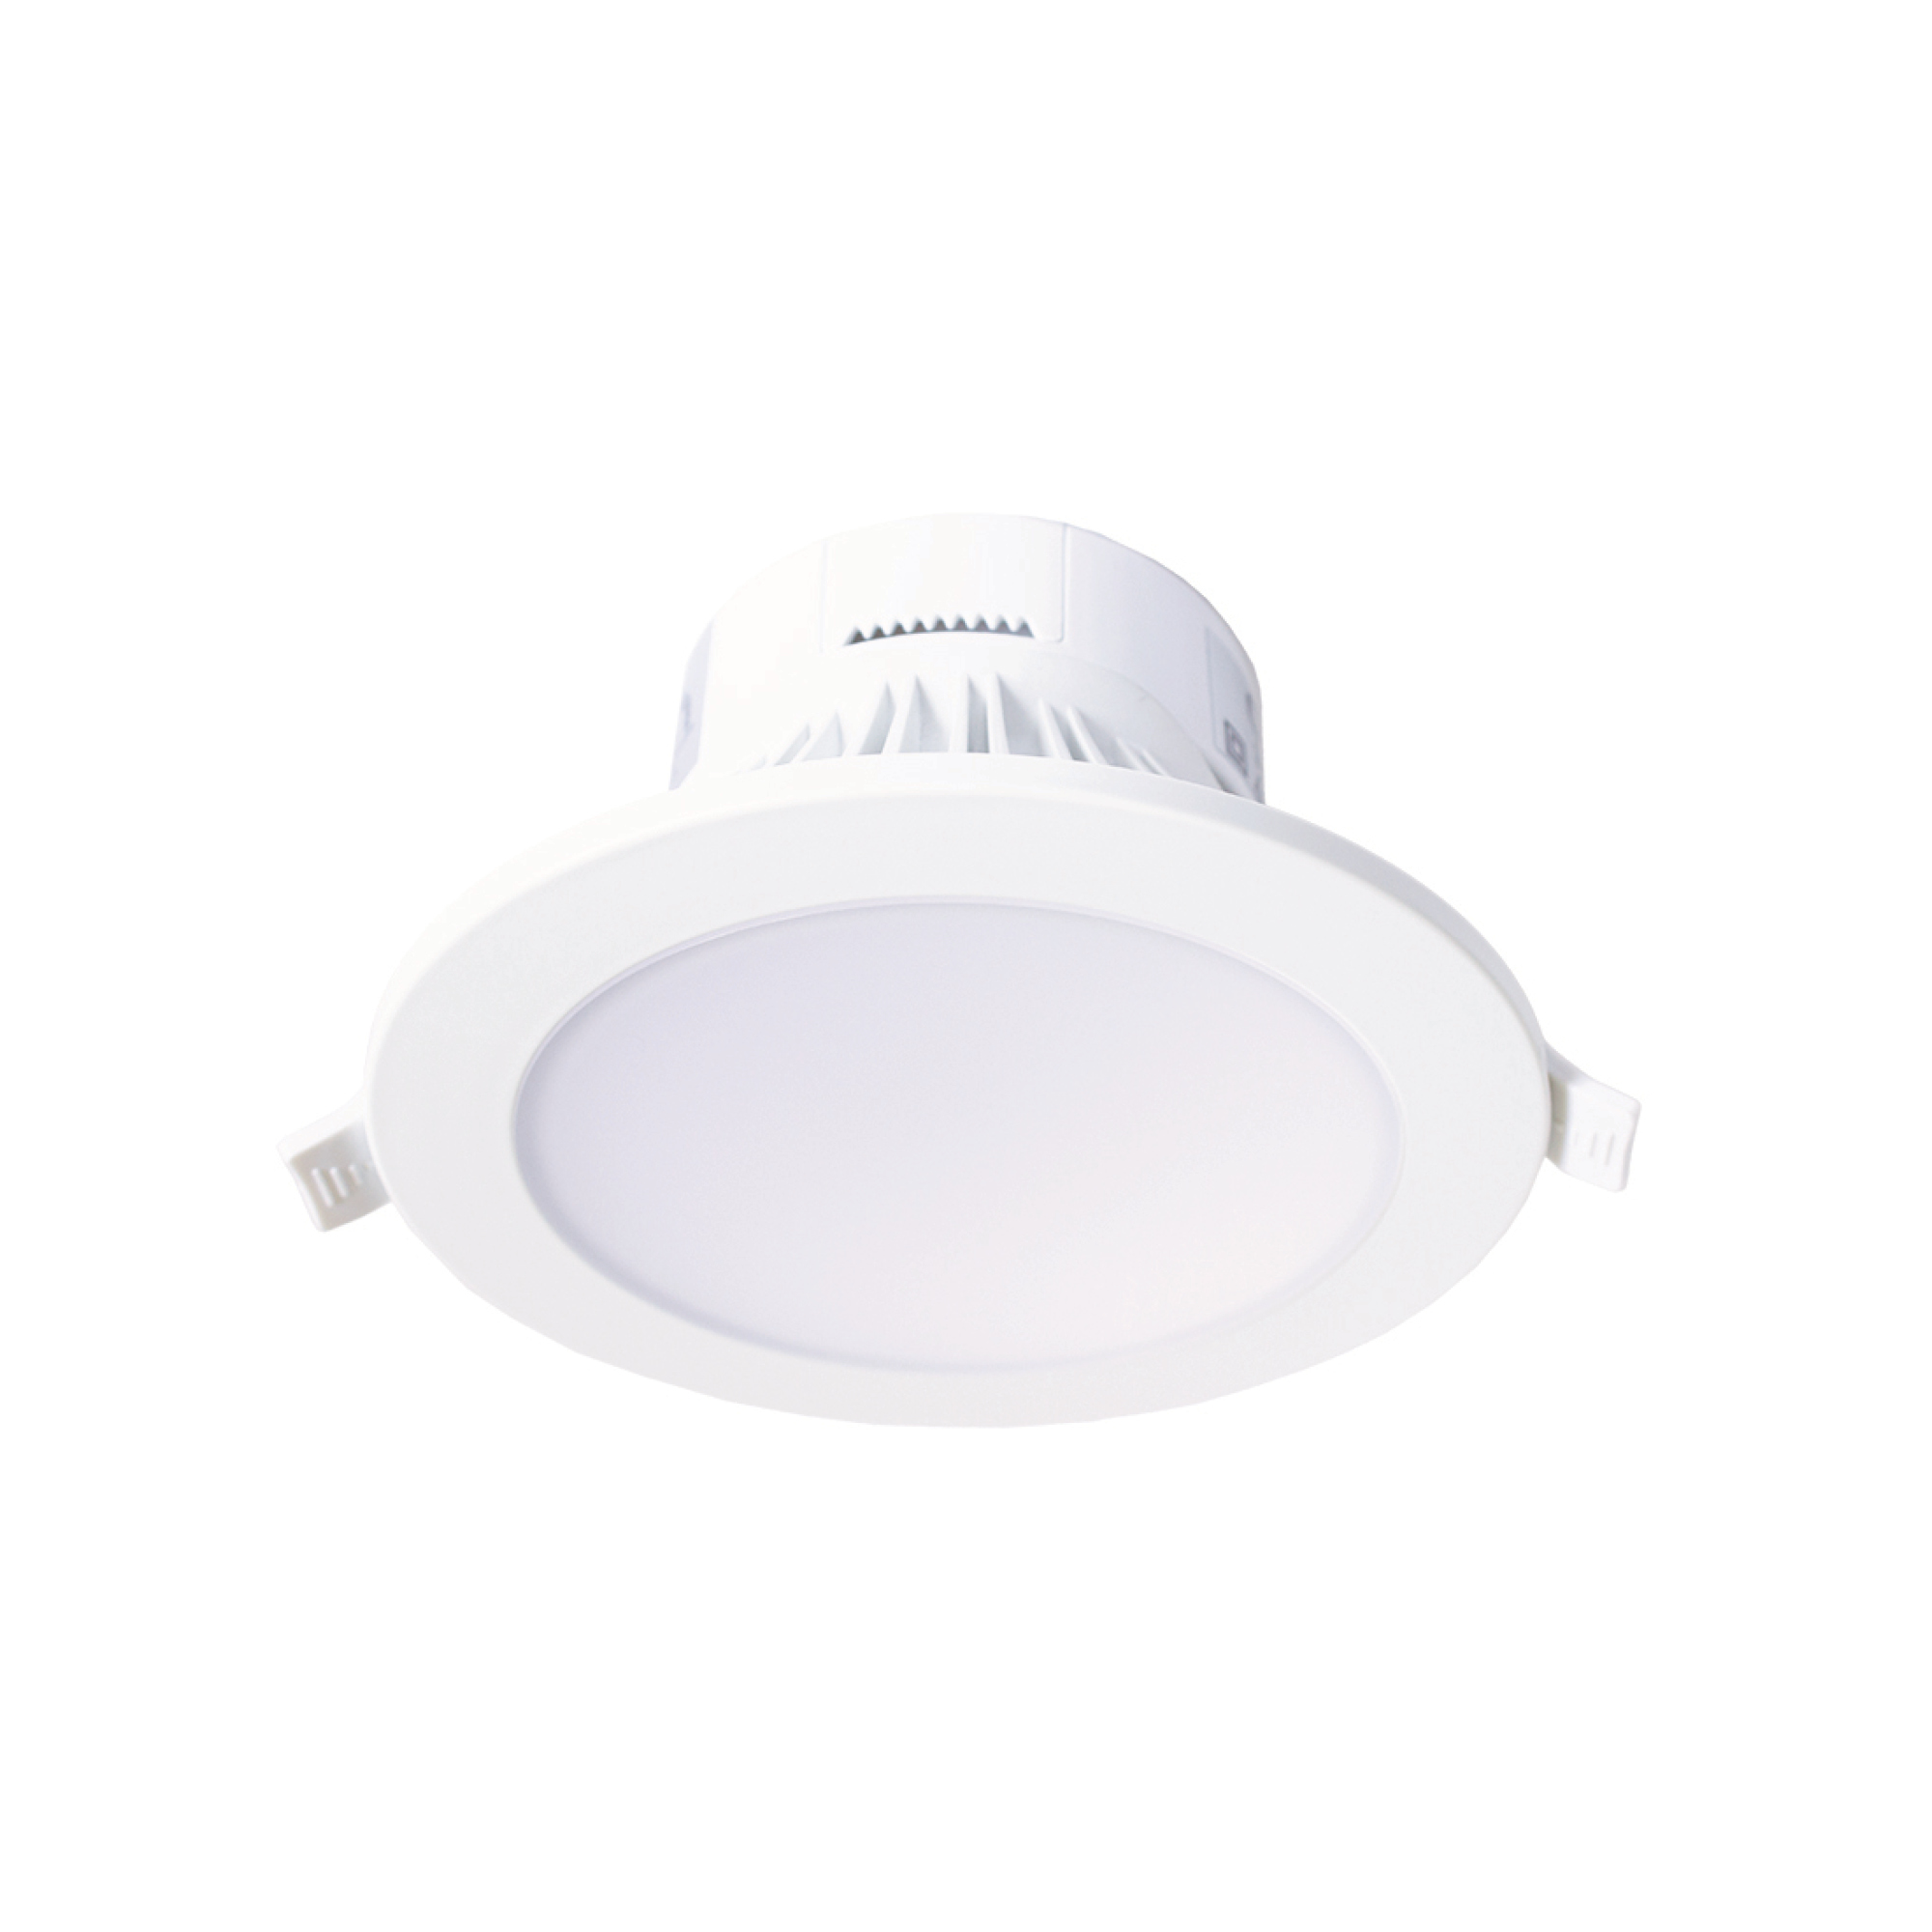 8W LED Downlight, 3CCT 3000/4200/6500K, Matte White, 830lm, IP44, Dimmable